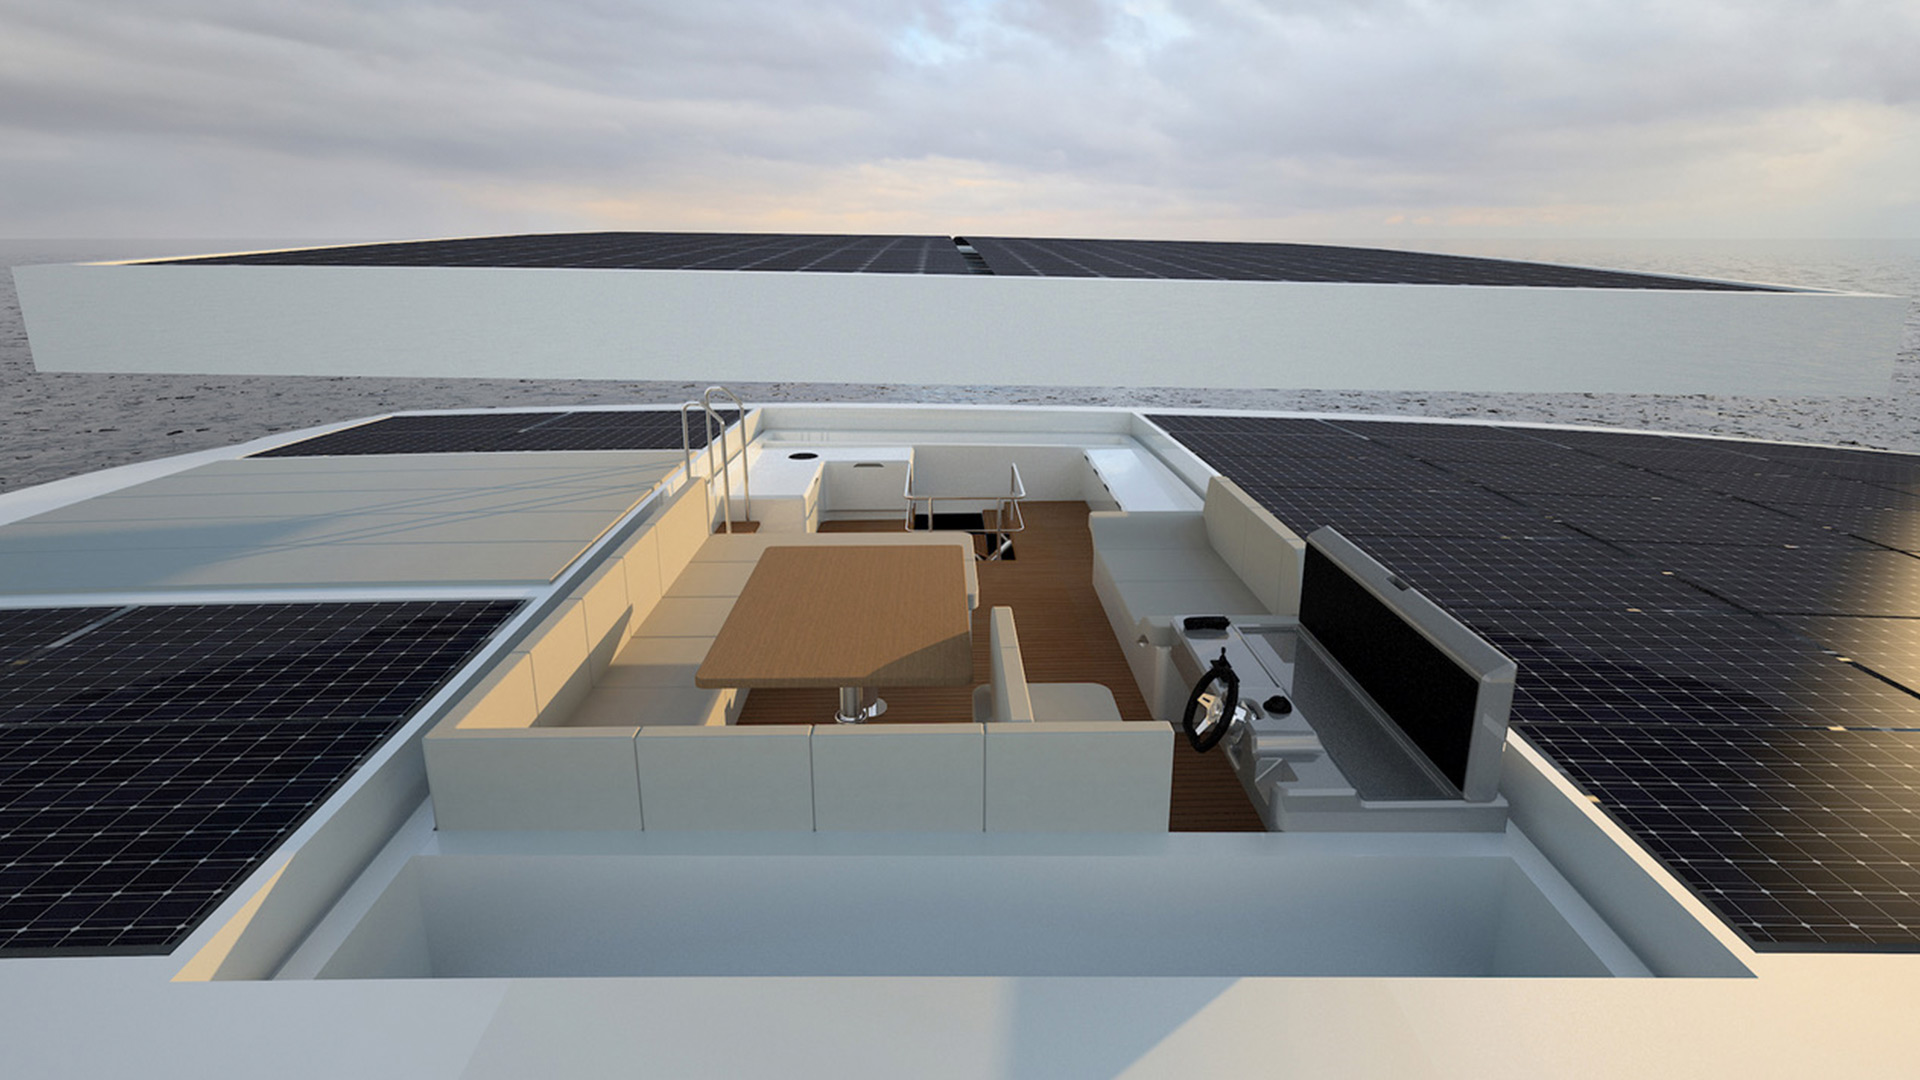 Solar panels on the flybridge and roof of a silent catamaran